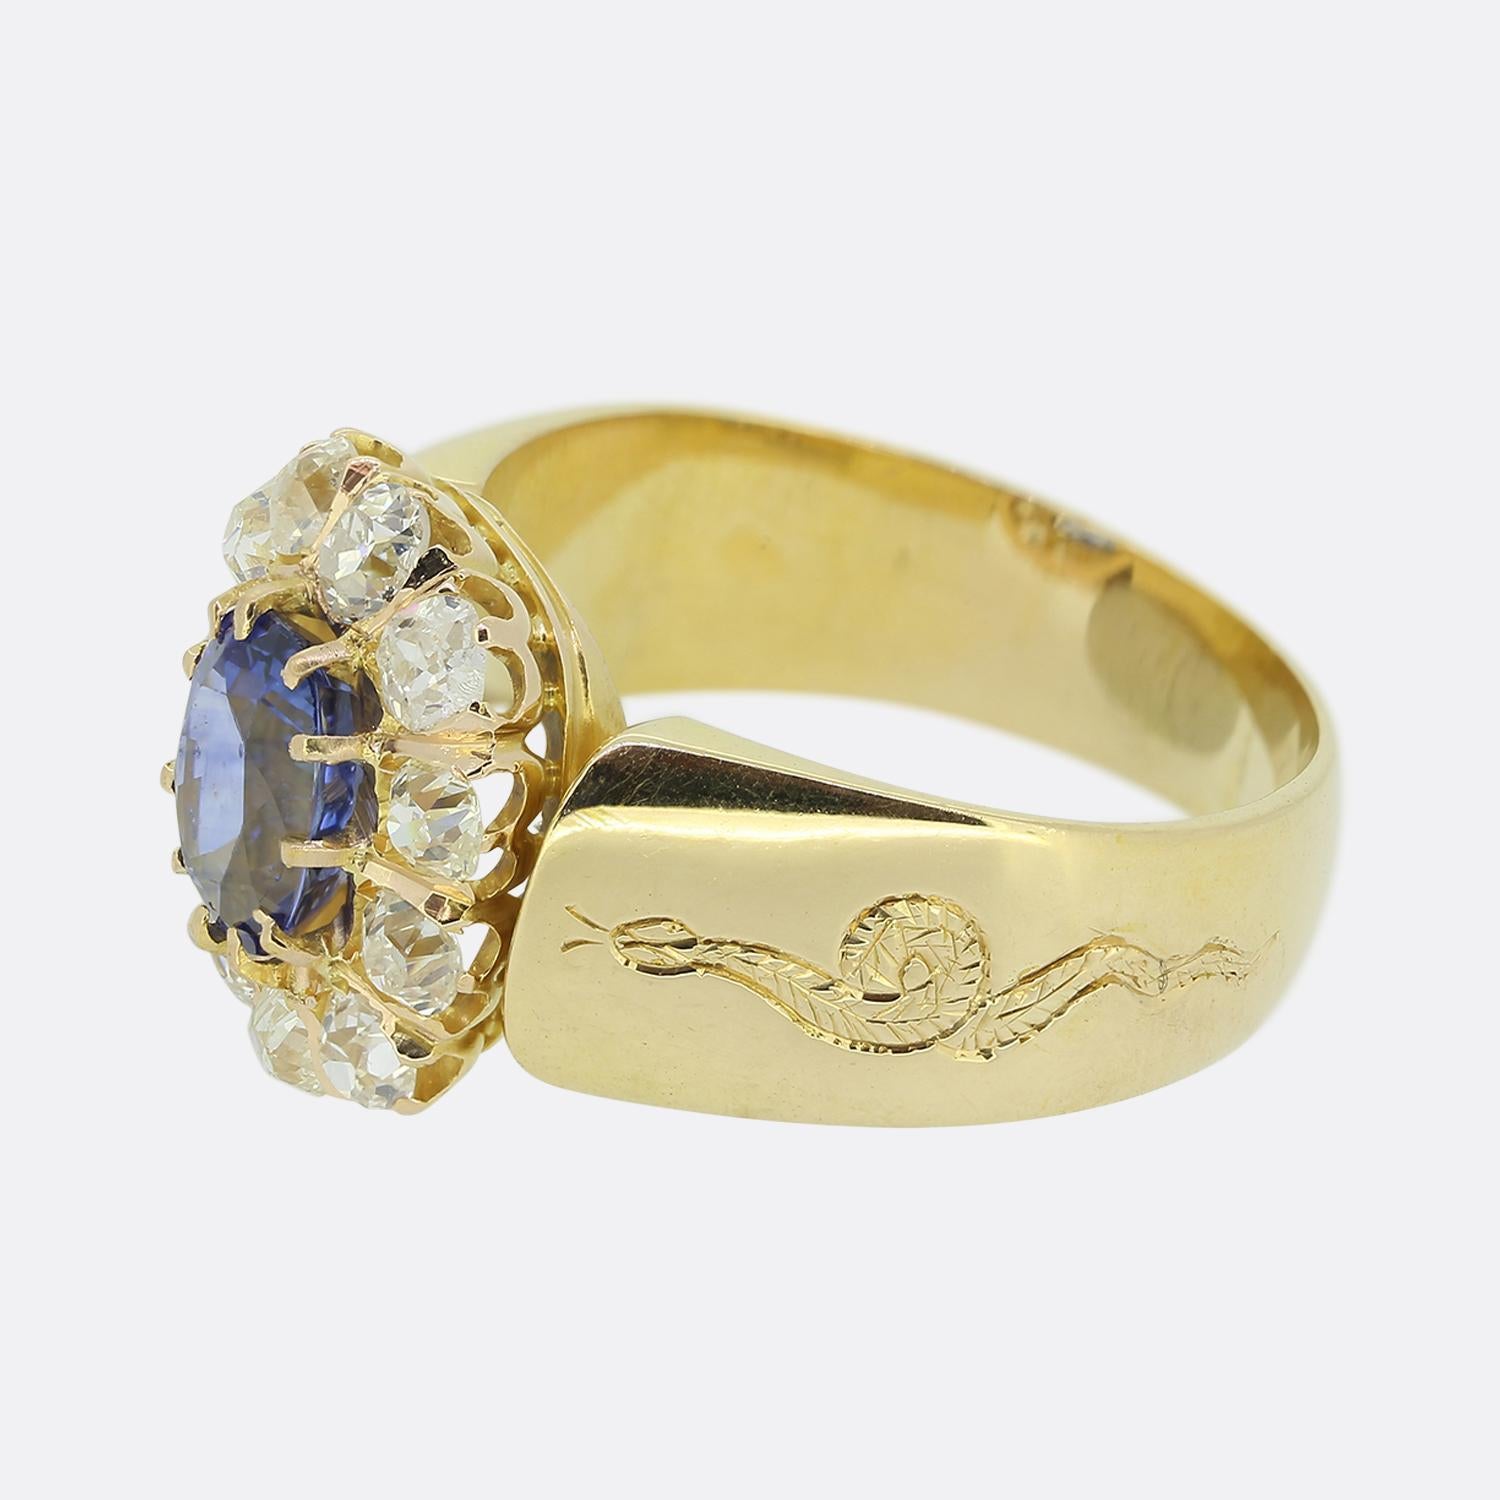 Here we have a superb sapphire and diamond cluster ring. This vintage piece has been crafted from a warm 18ct yellow gold and showcases a breathtaking oval faceted natural sapphire at the centre of the face. This principal stone boasts a vibrant